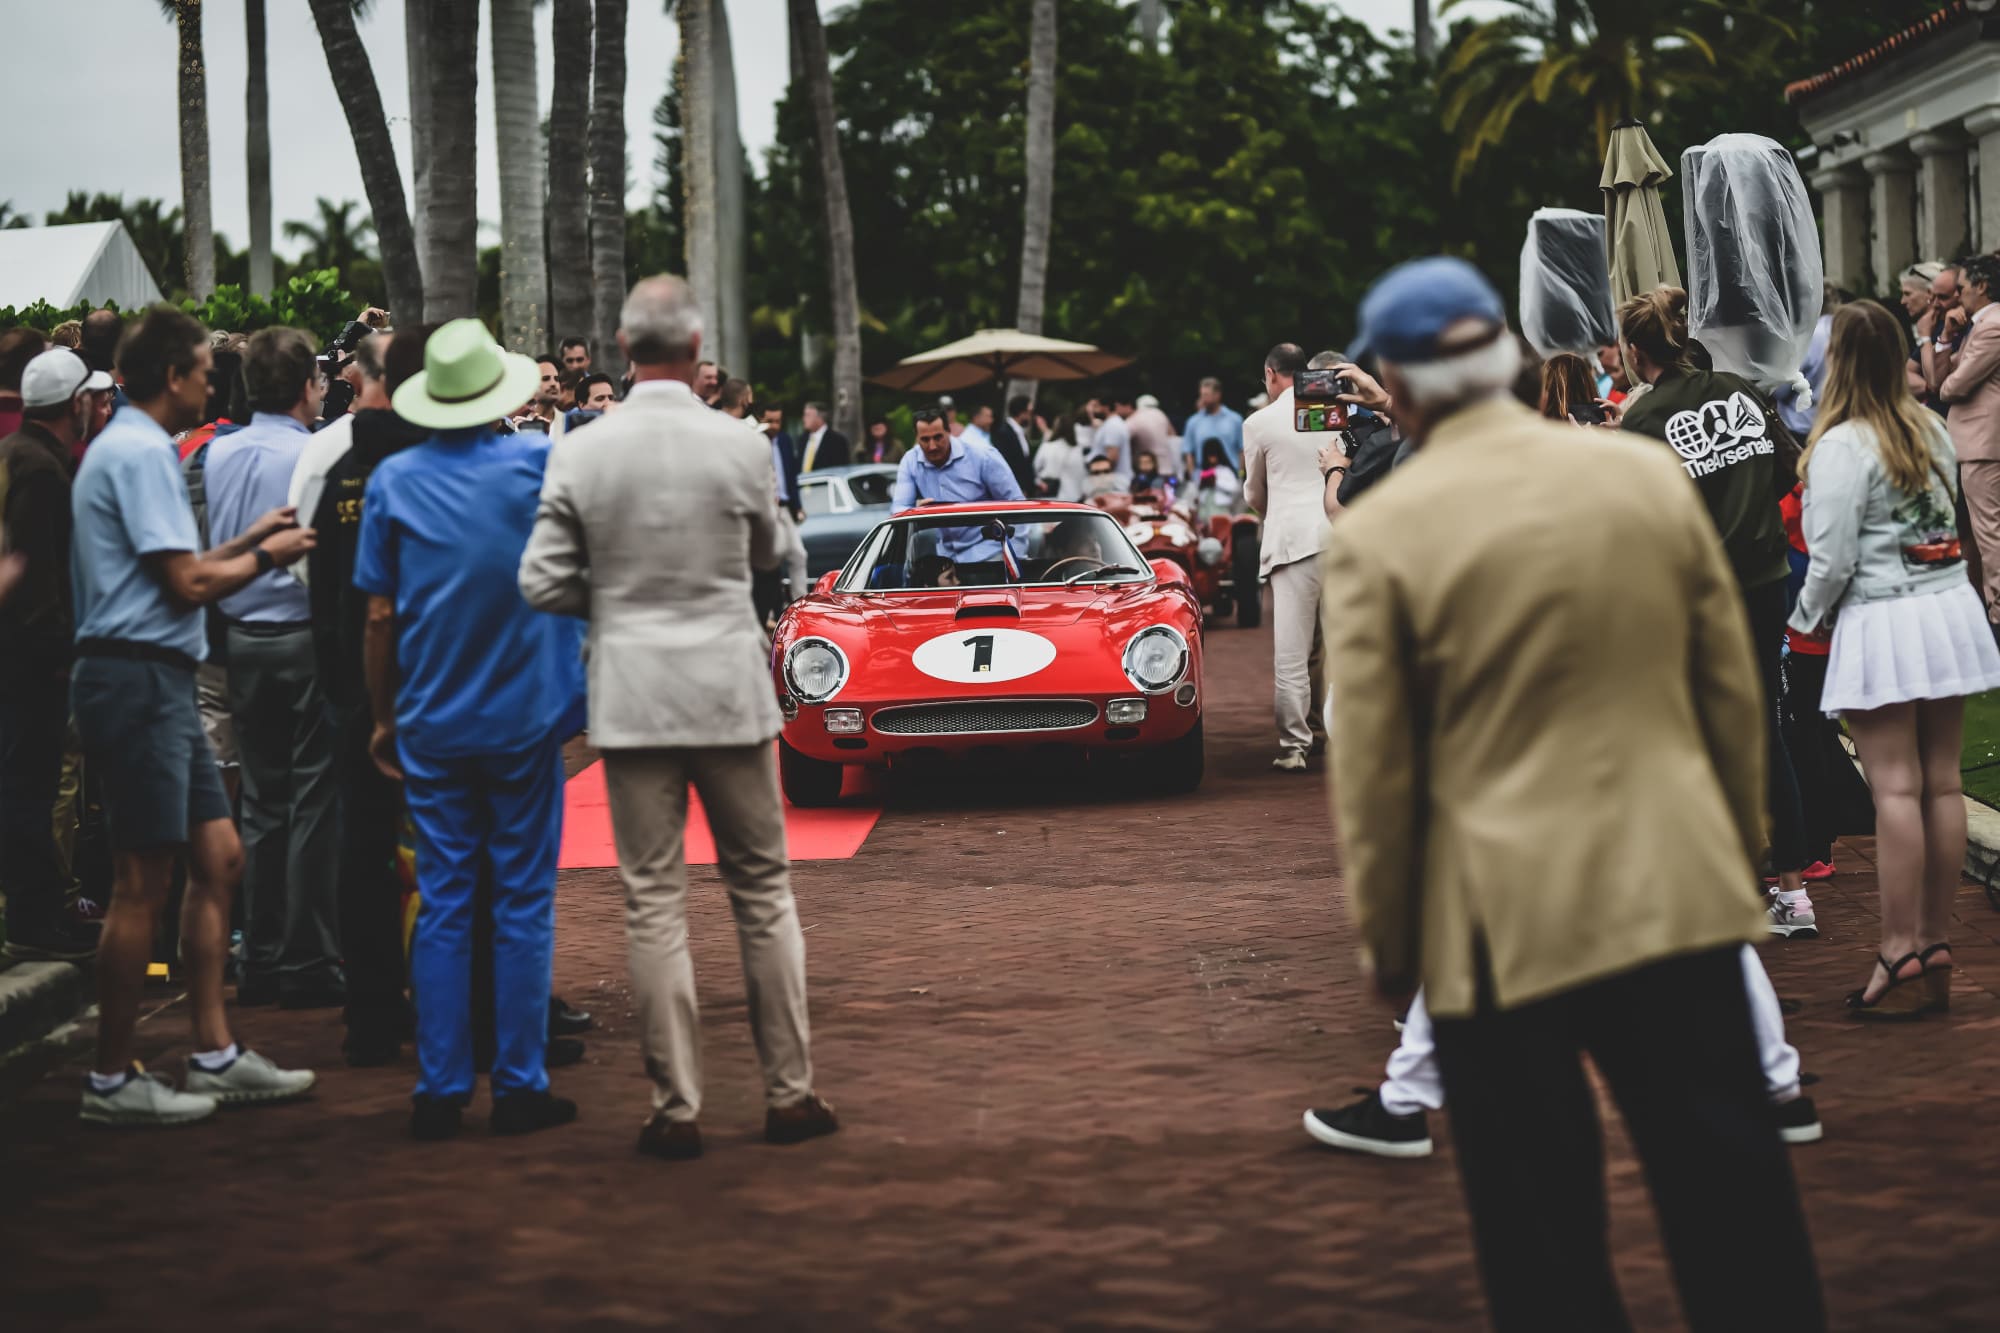 Get your ticket and secure your spot at the Concorso d’Eleganza on Saturday, January 28￼